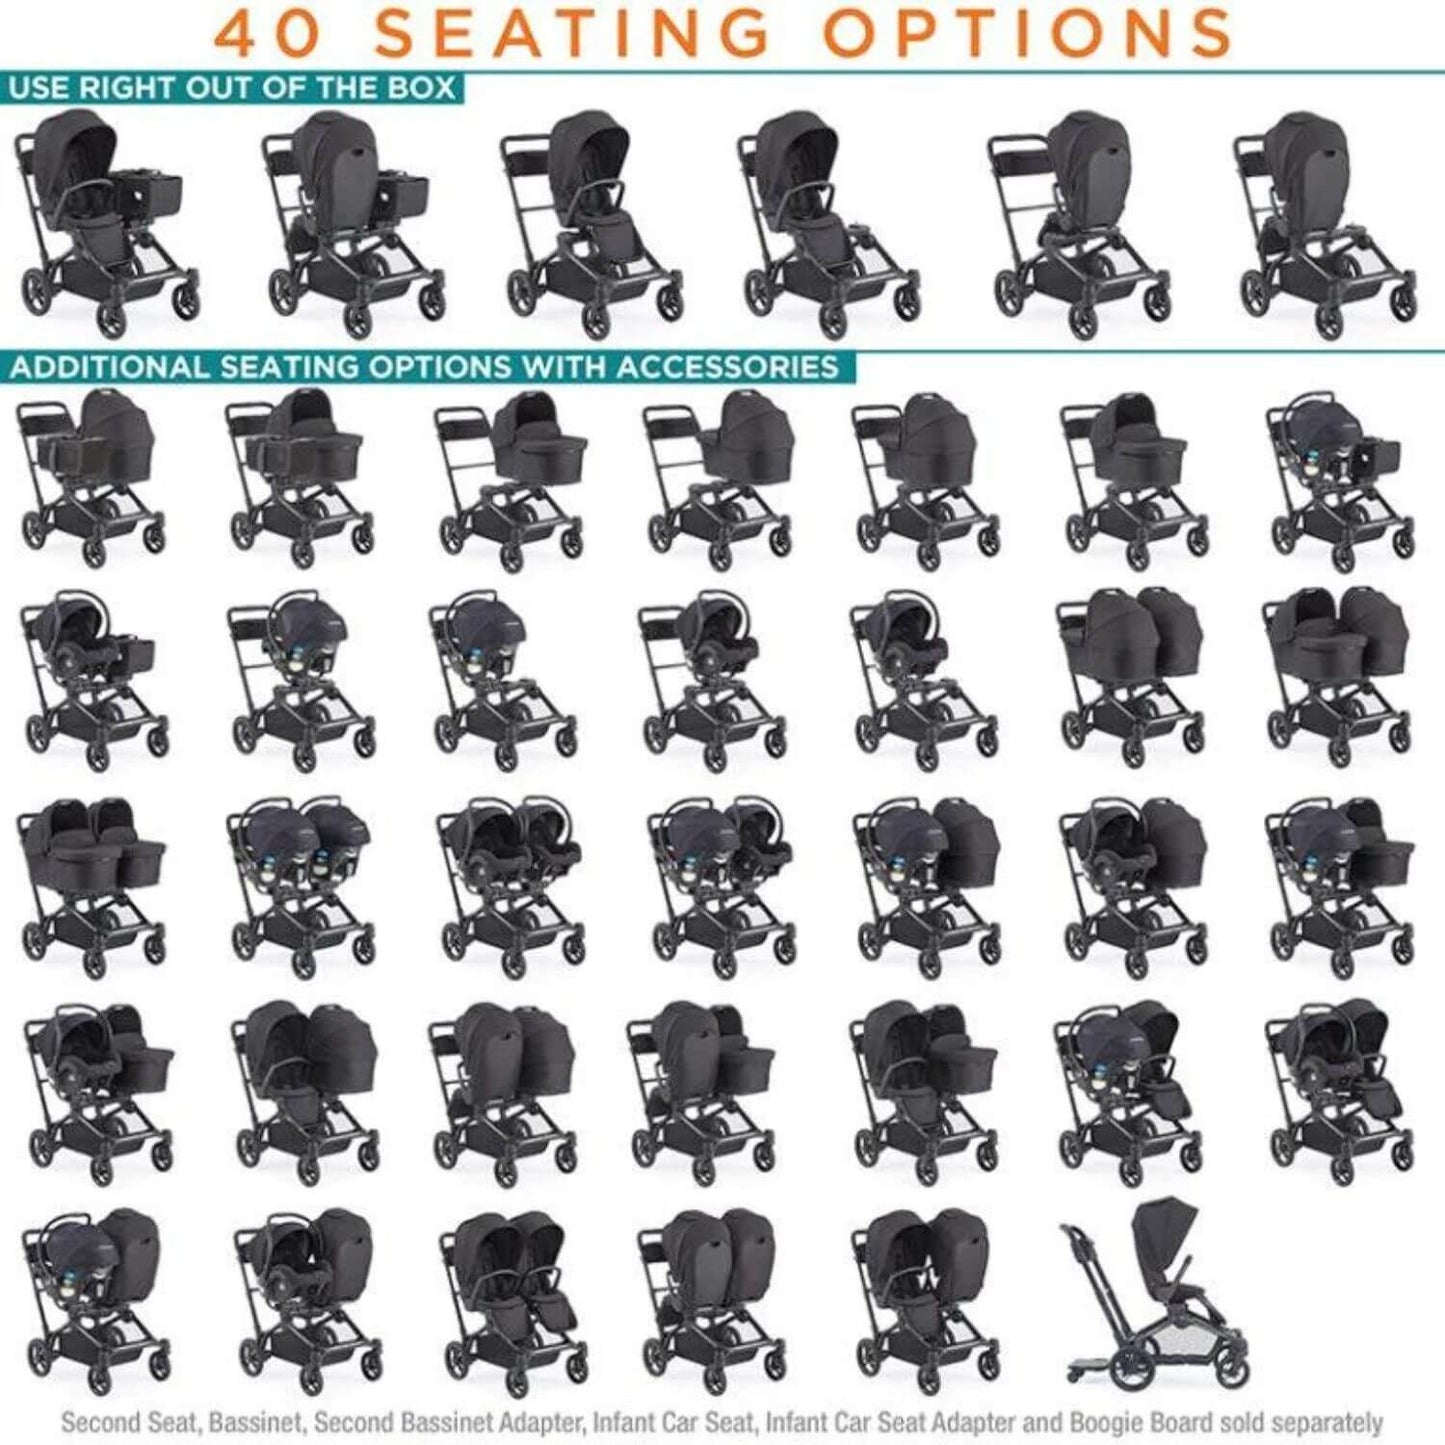 Contours Element Side by Side 1-to-2 Stroller - 40 Seating Options